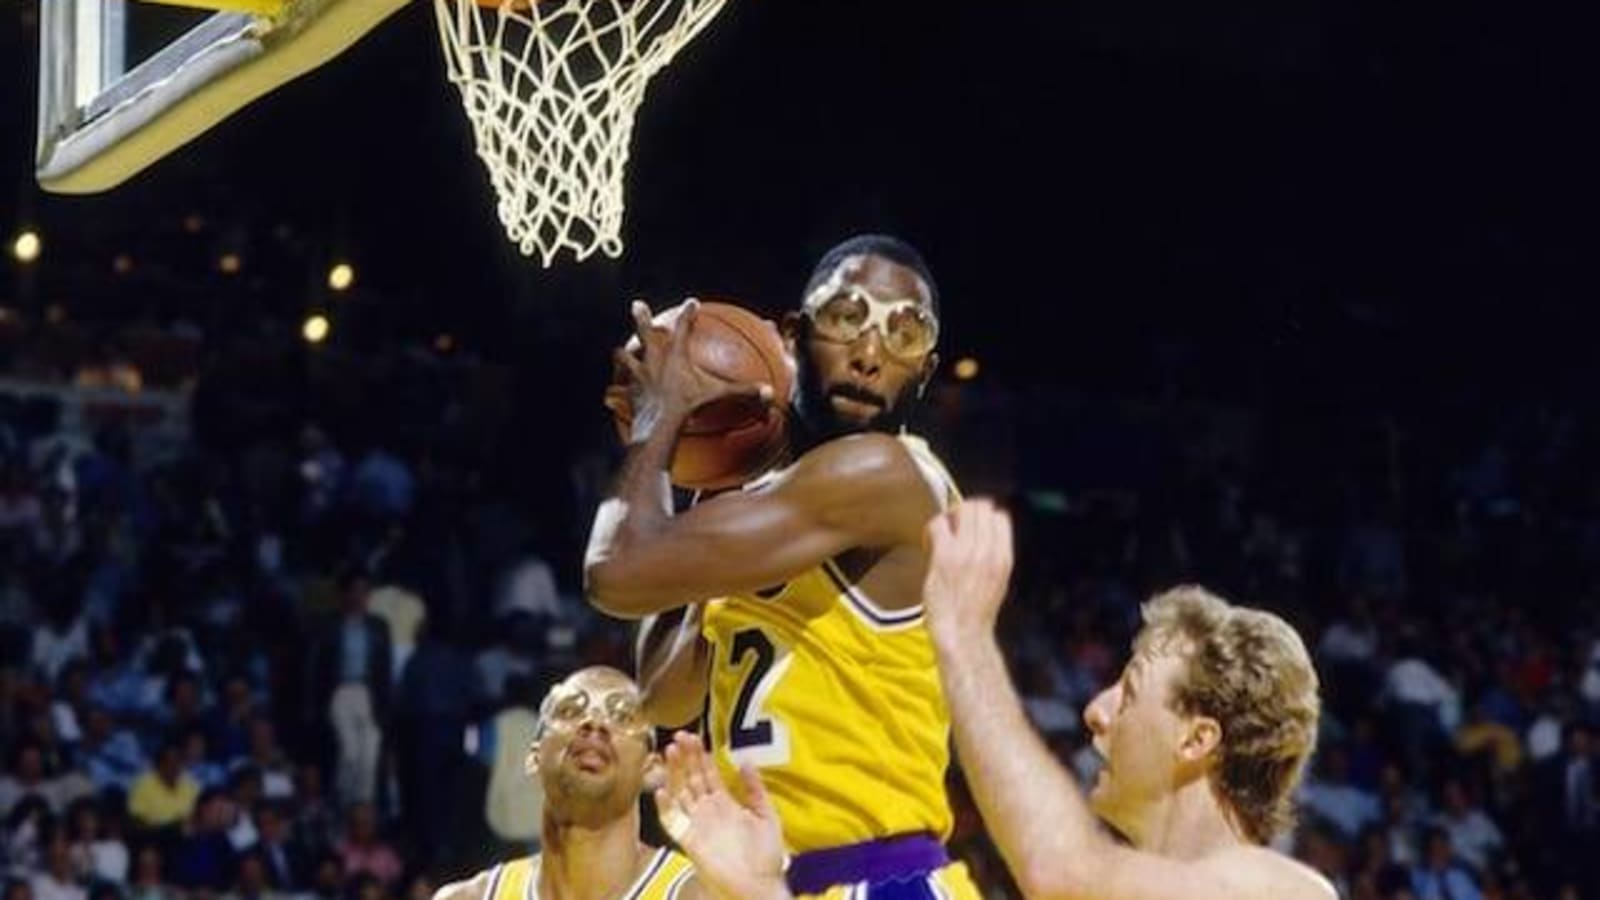 This Day In Lakers History: James Worthy’s No. 42 Jersey Retired